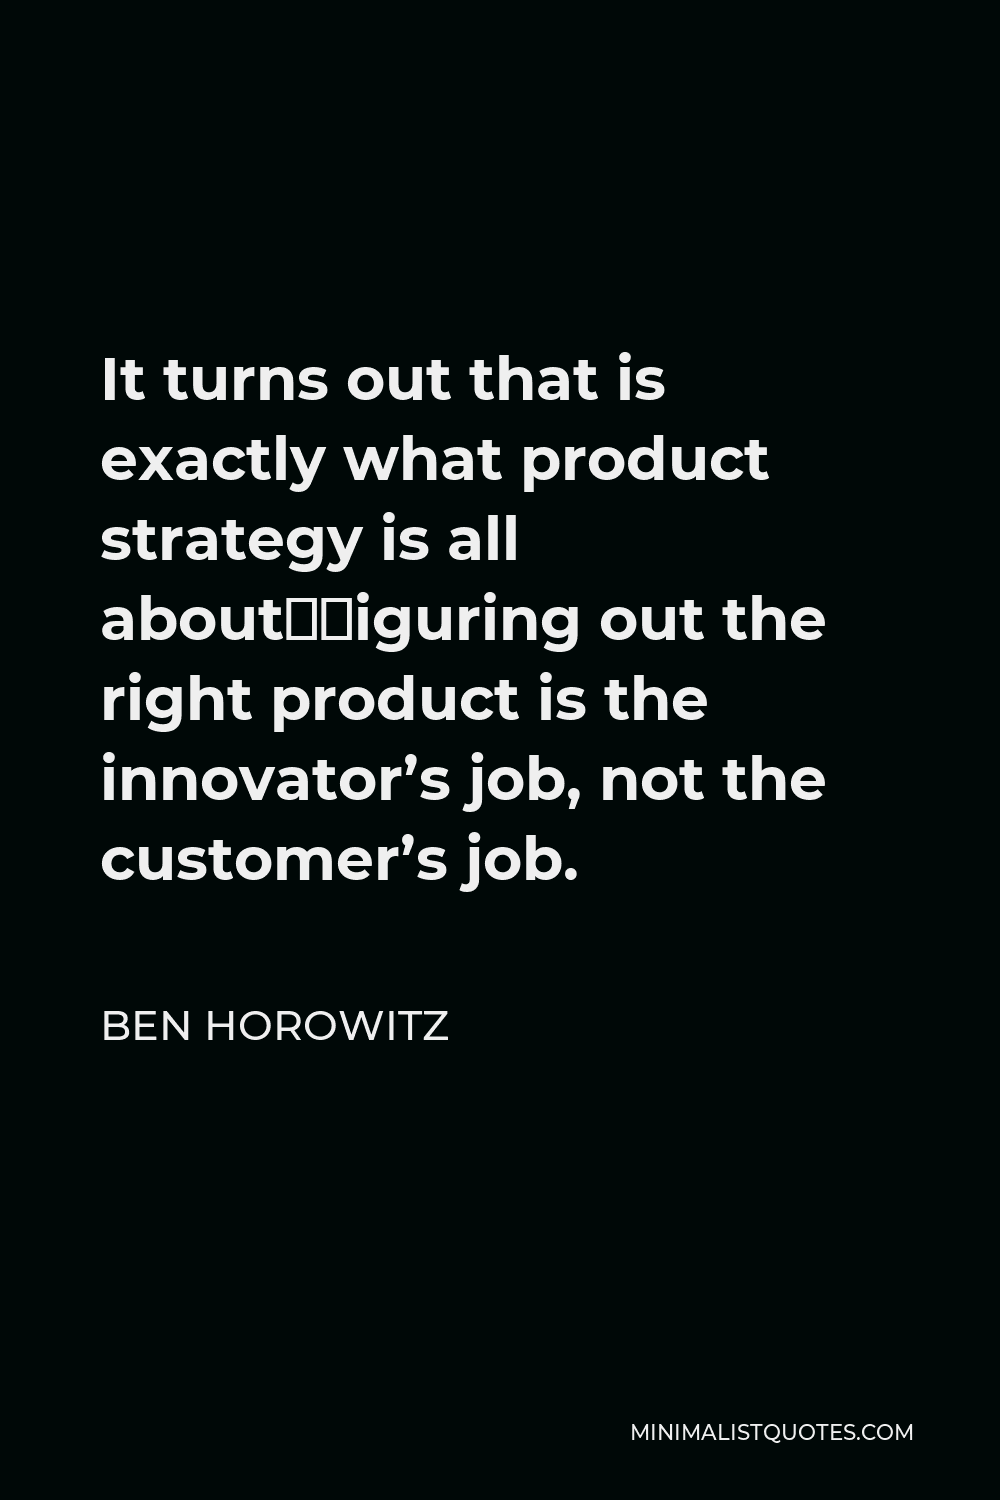 Ben Horowitz Quote - It turns out that is exactly what product strategy is all about—figuring out the right product is the innovator’s job, not the customer’s job.